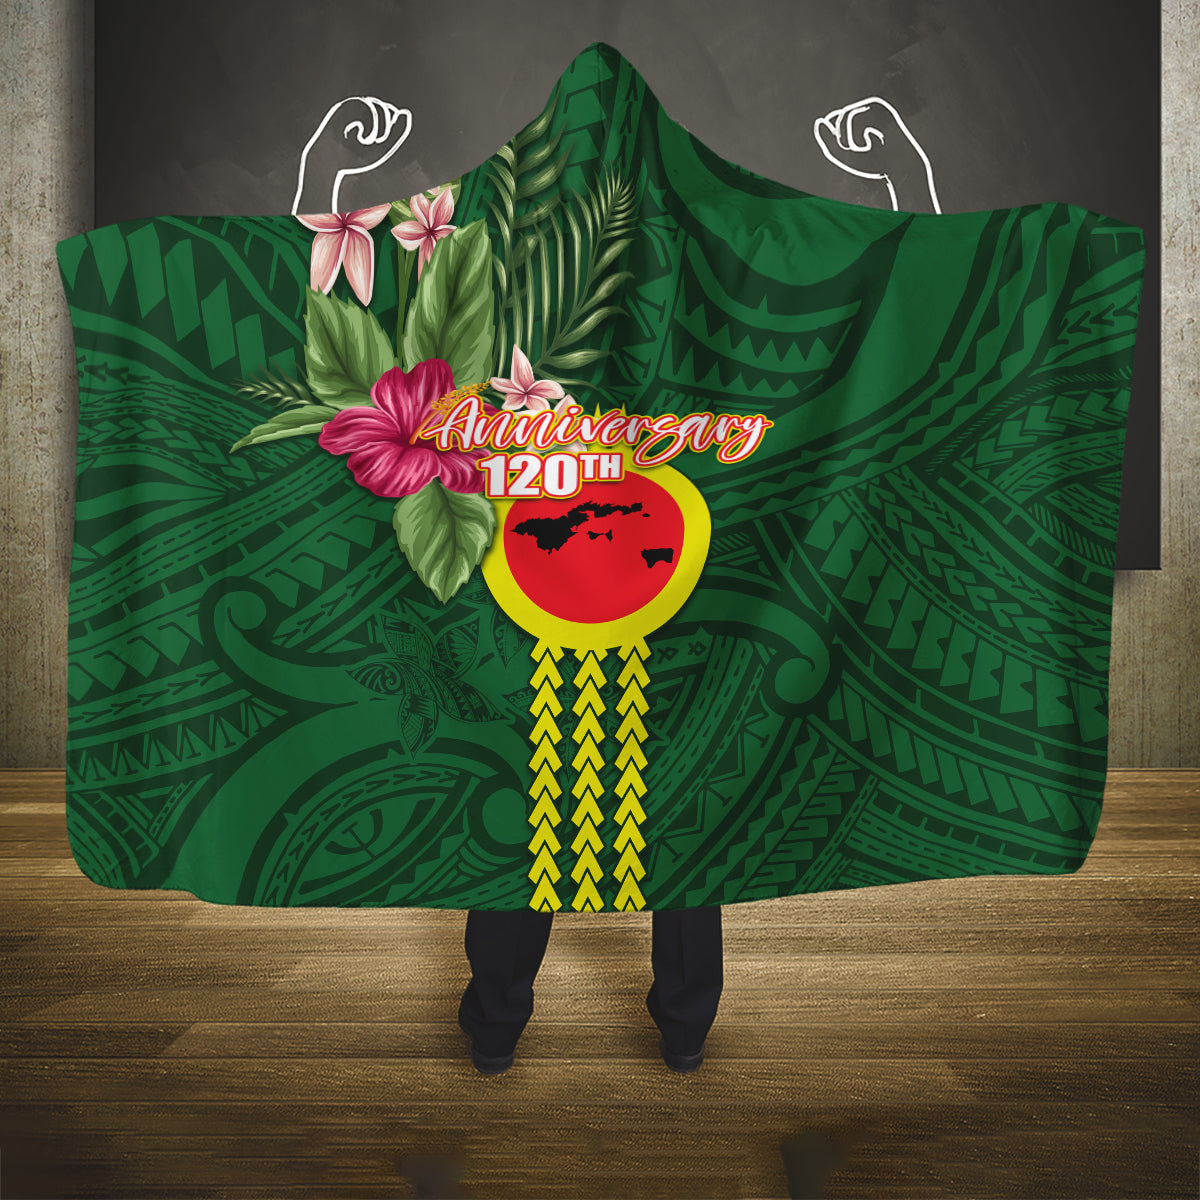 Manu'a Cession Day 120th Anniversary Hooded Blanket Polynesian Pattern and Hibiscus Flower